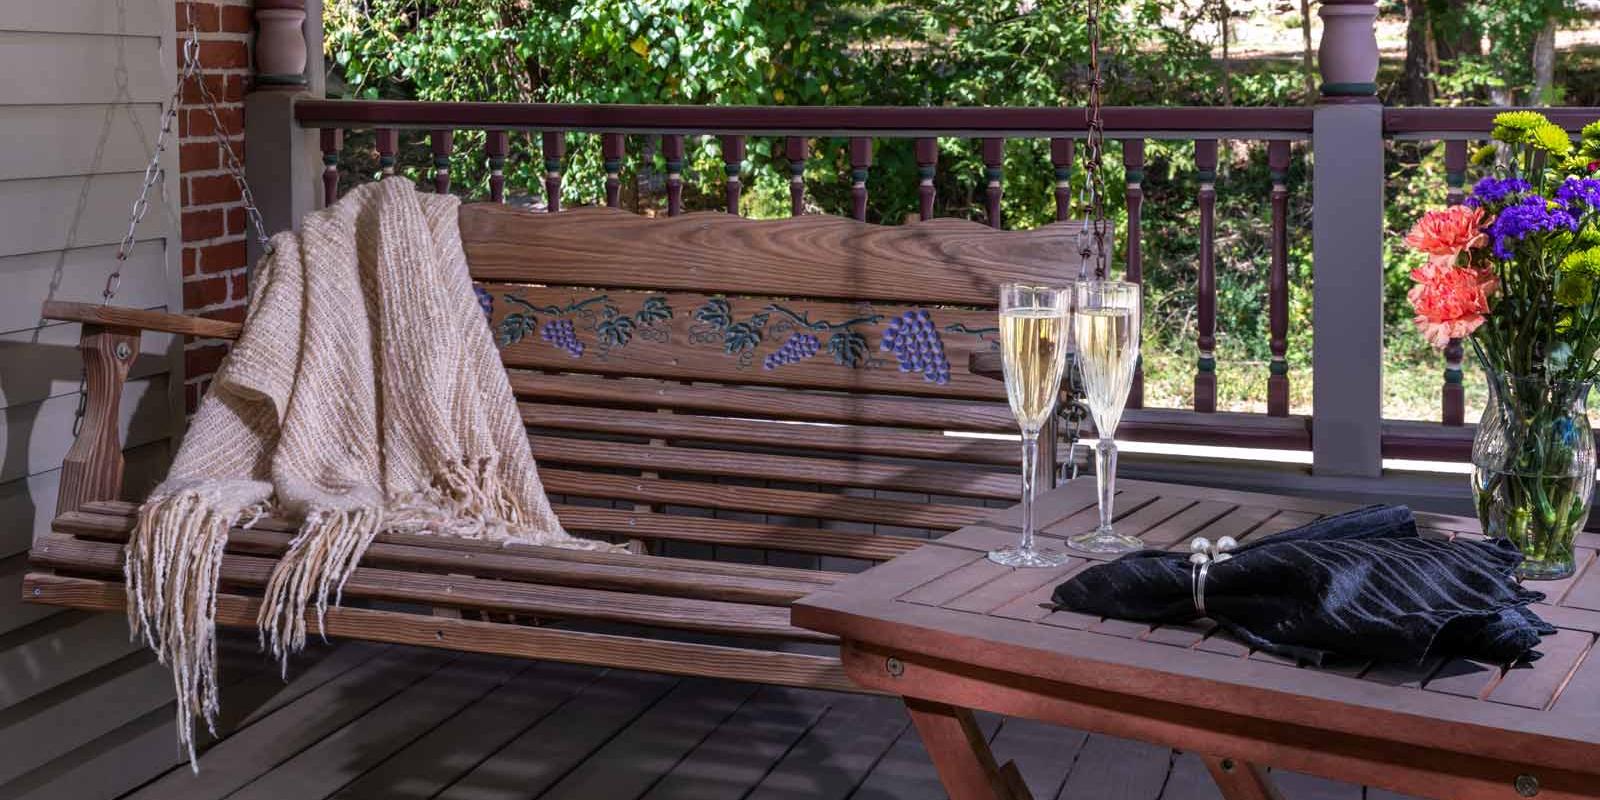 #1 Hotels in Eureka Springs AR | The Gabriel Deck at The Angel at Rose Hall